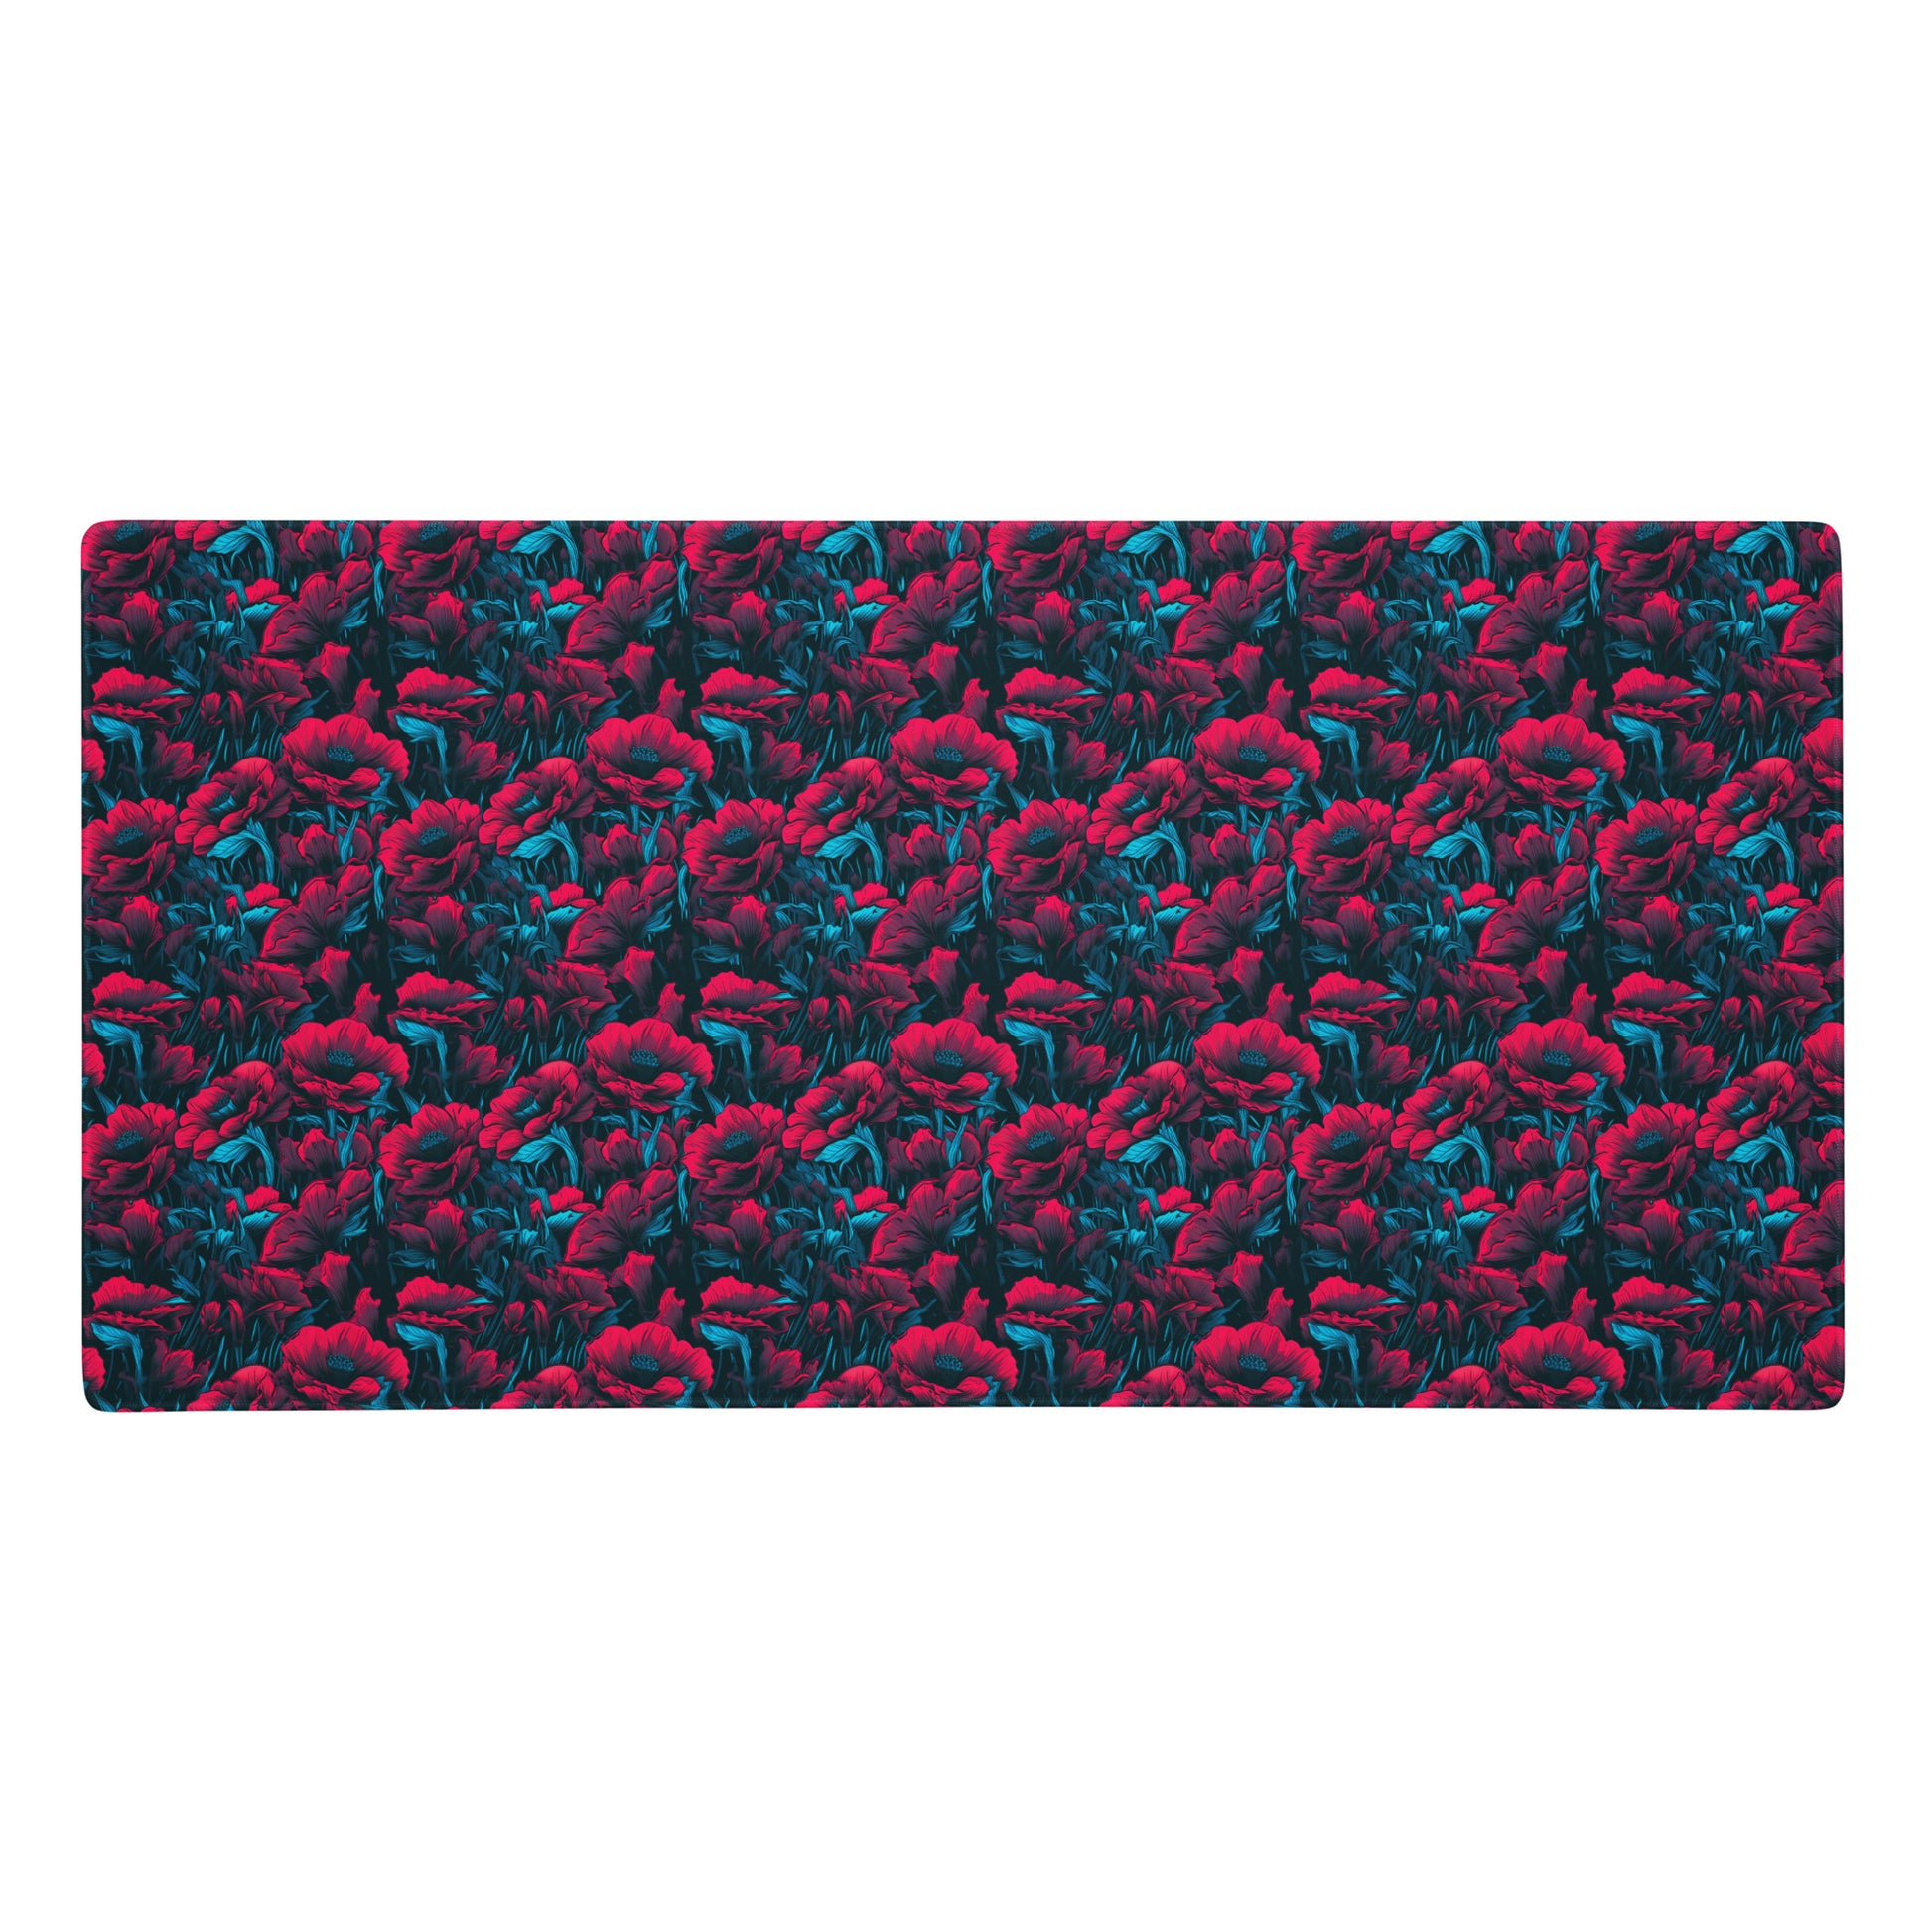 A 36" x 18" desk pad with a red and blue floral pattern.